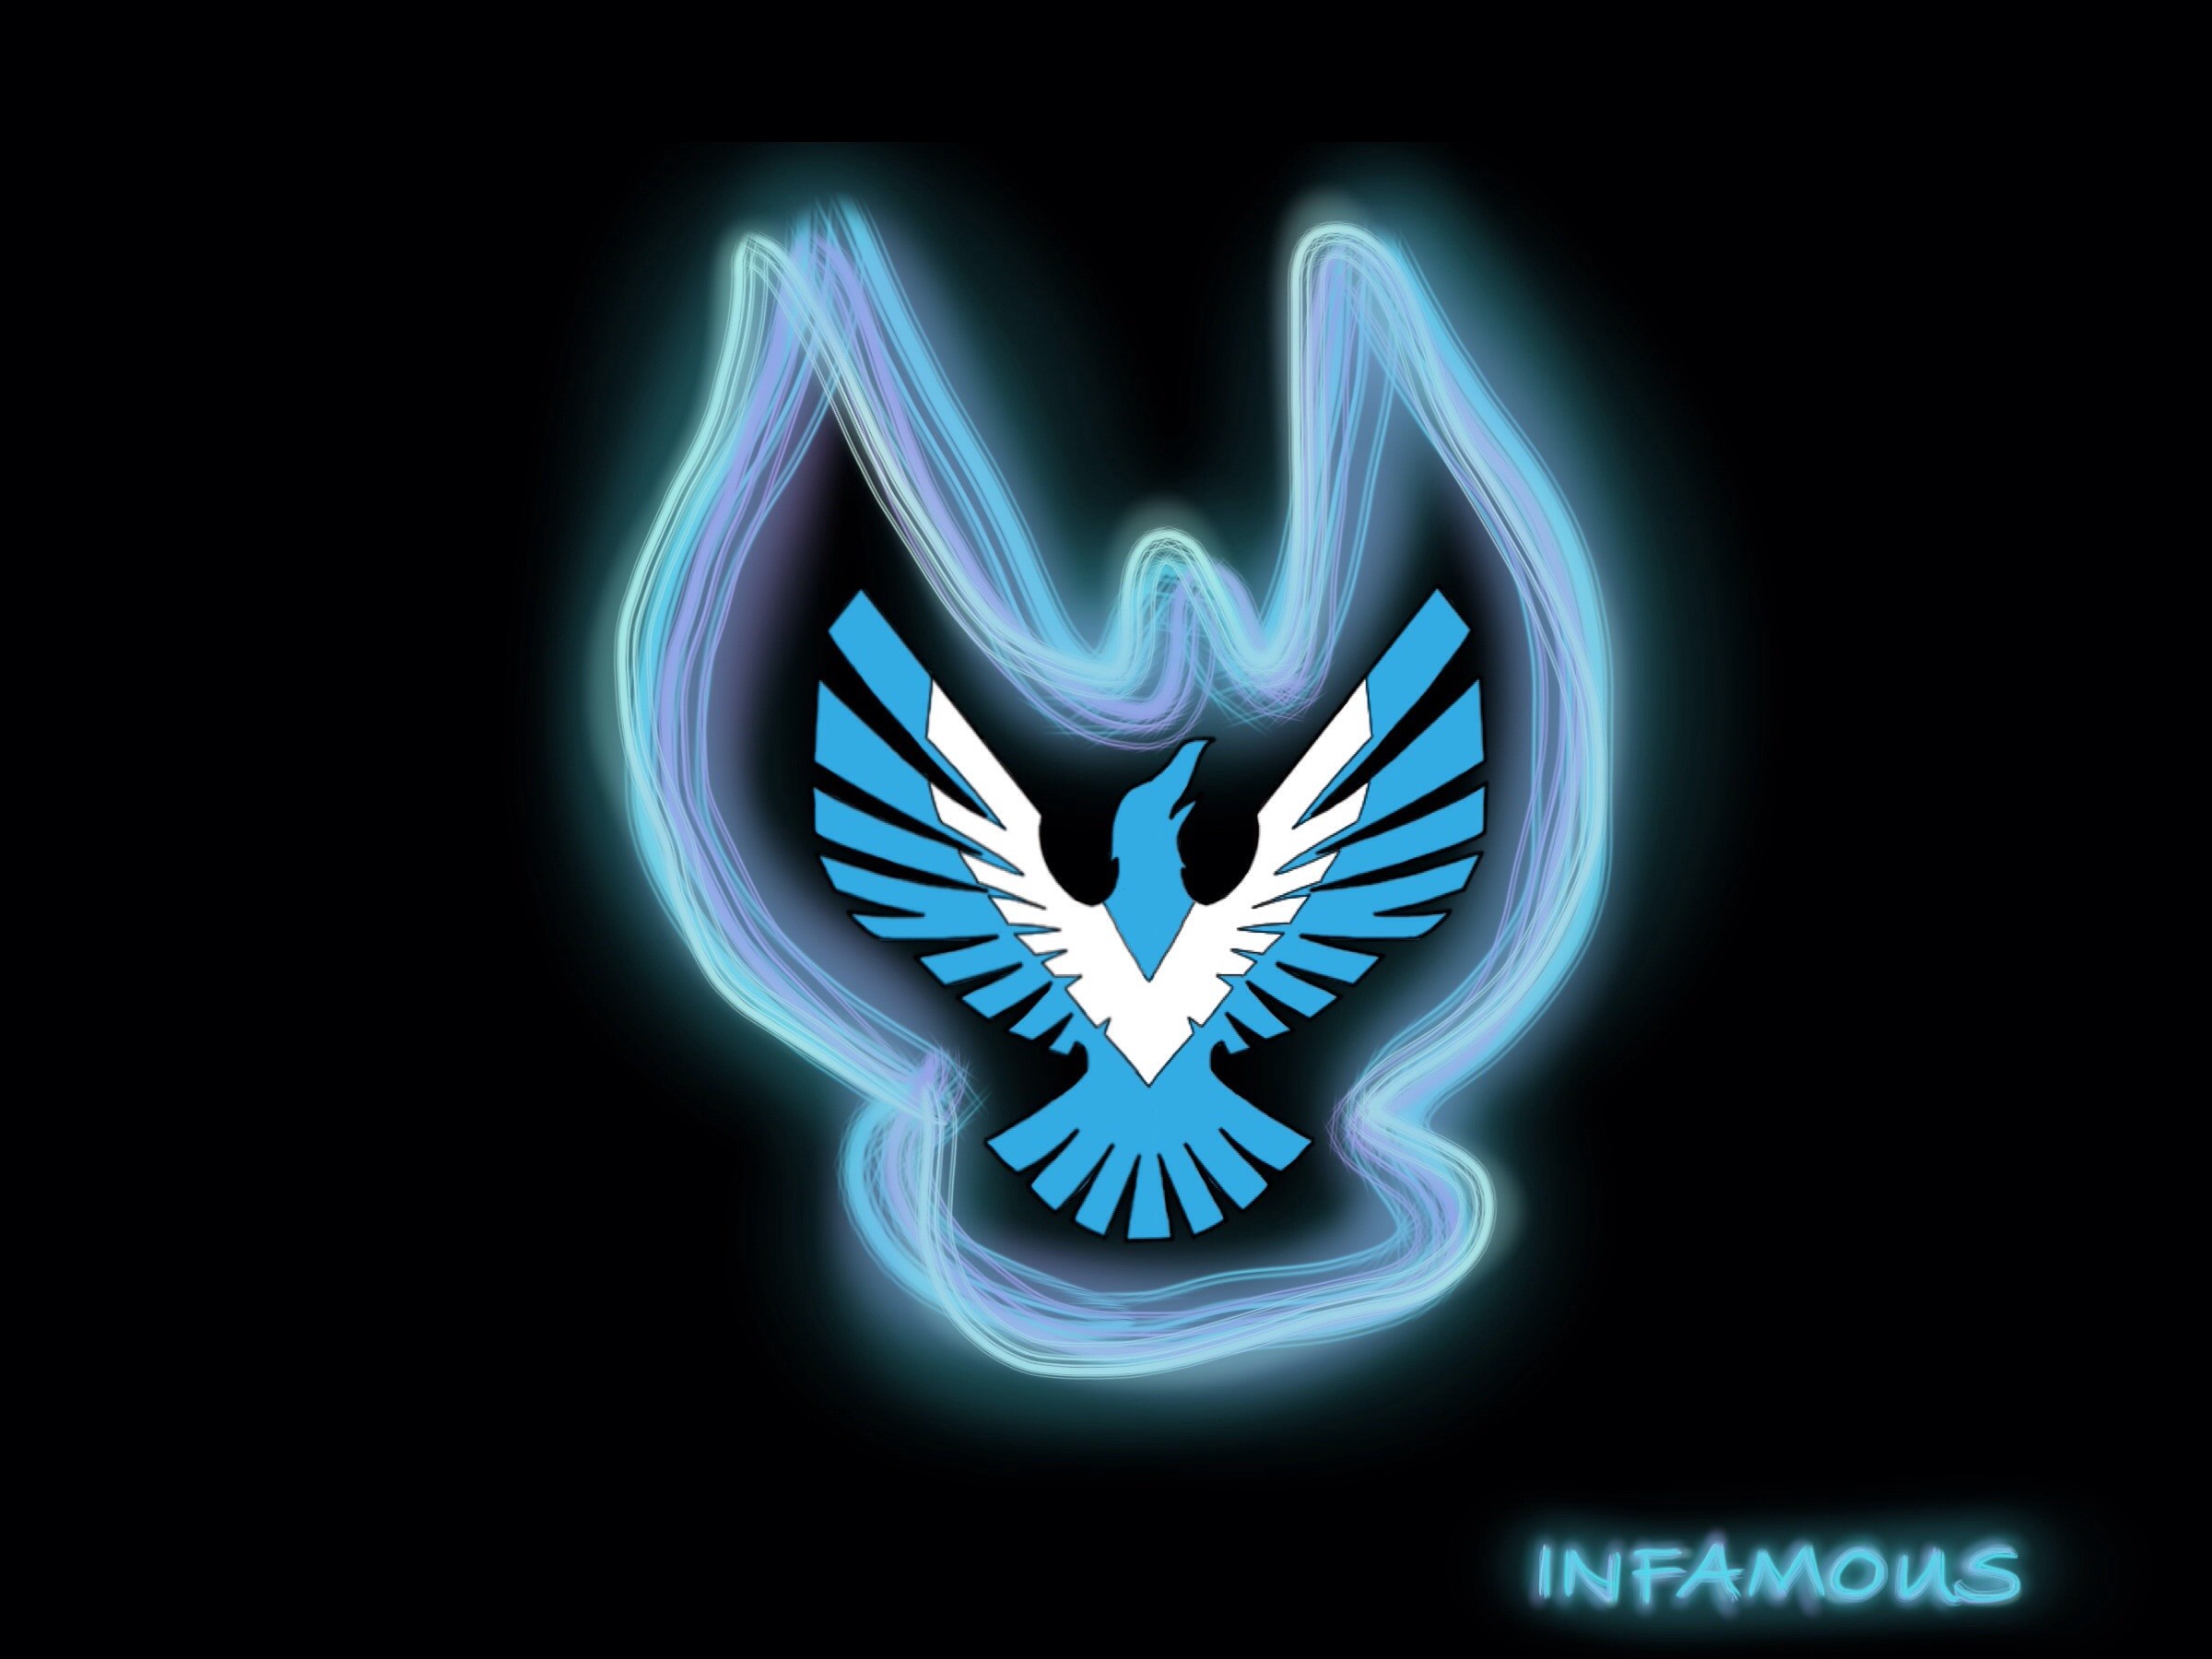 2400x1800 ... Infamous second son good route wallpaper by AnonymousAvox